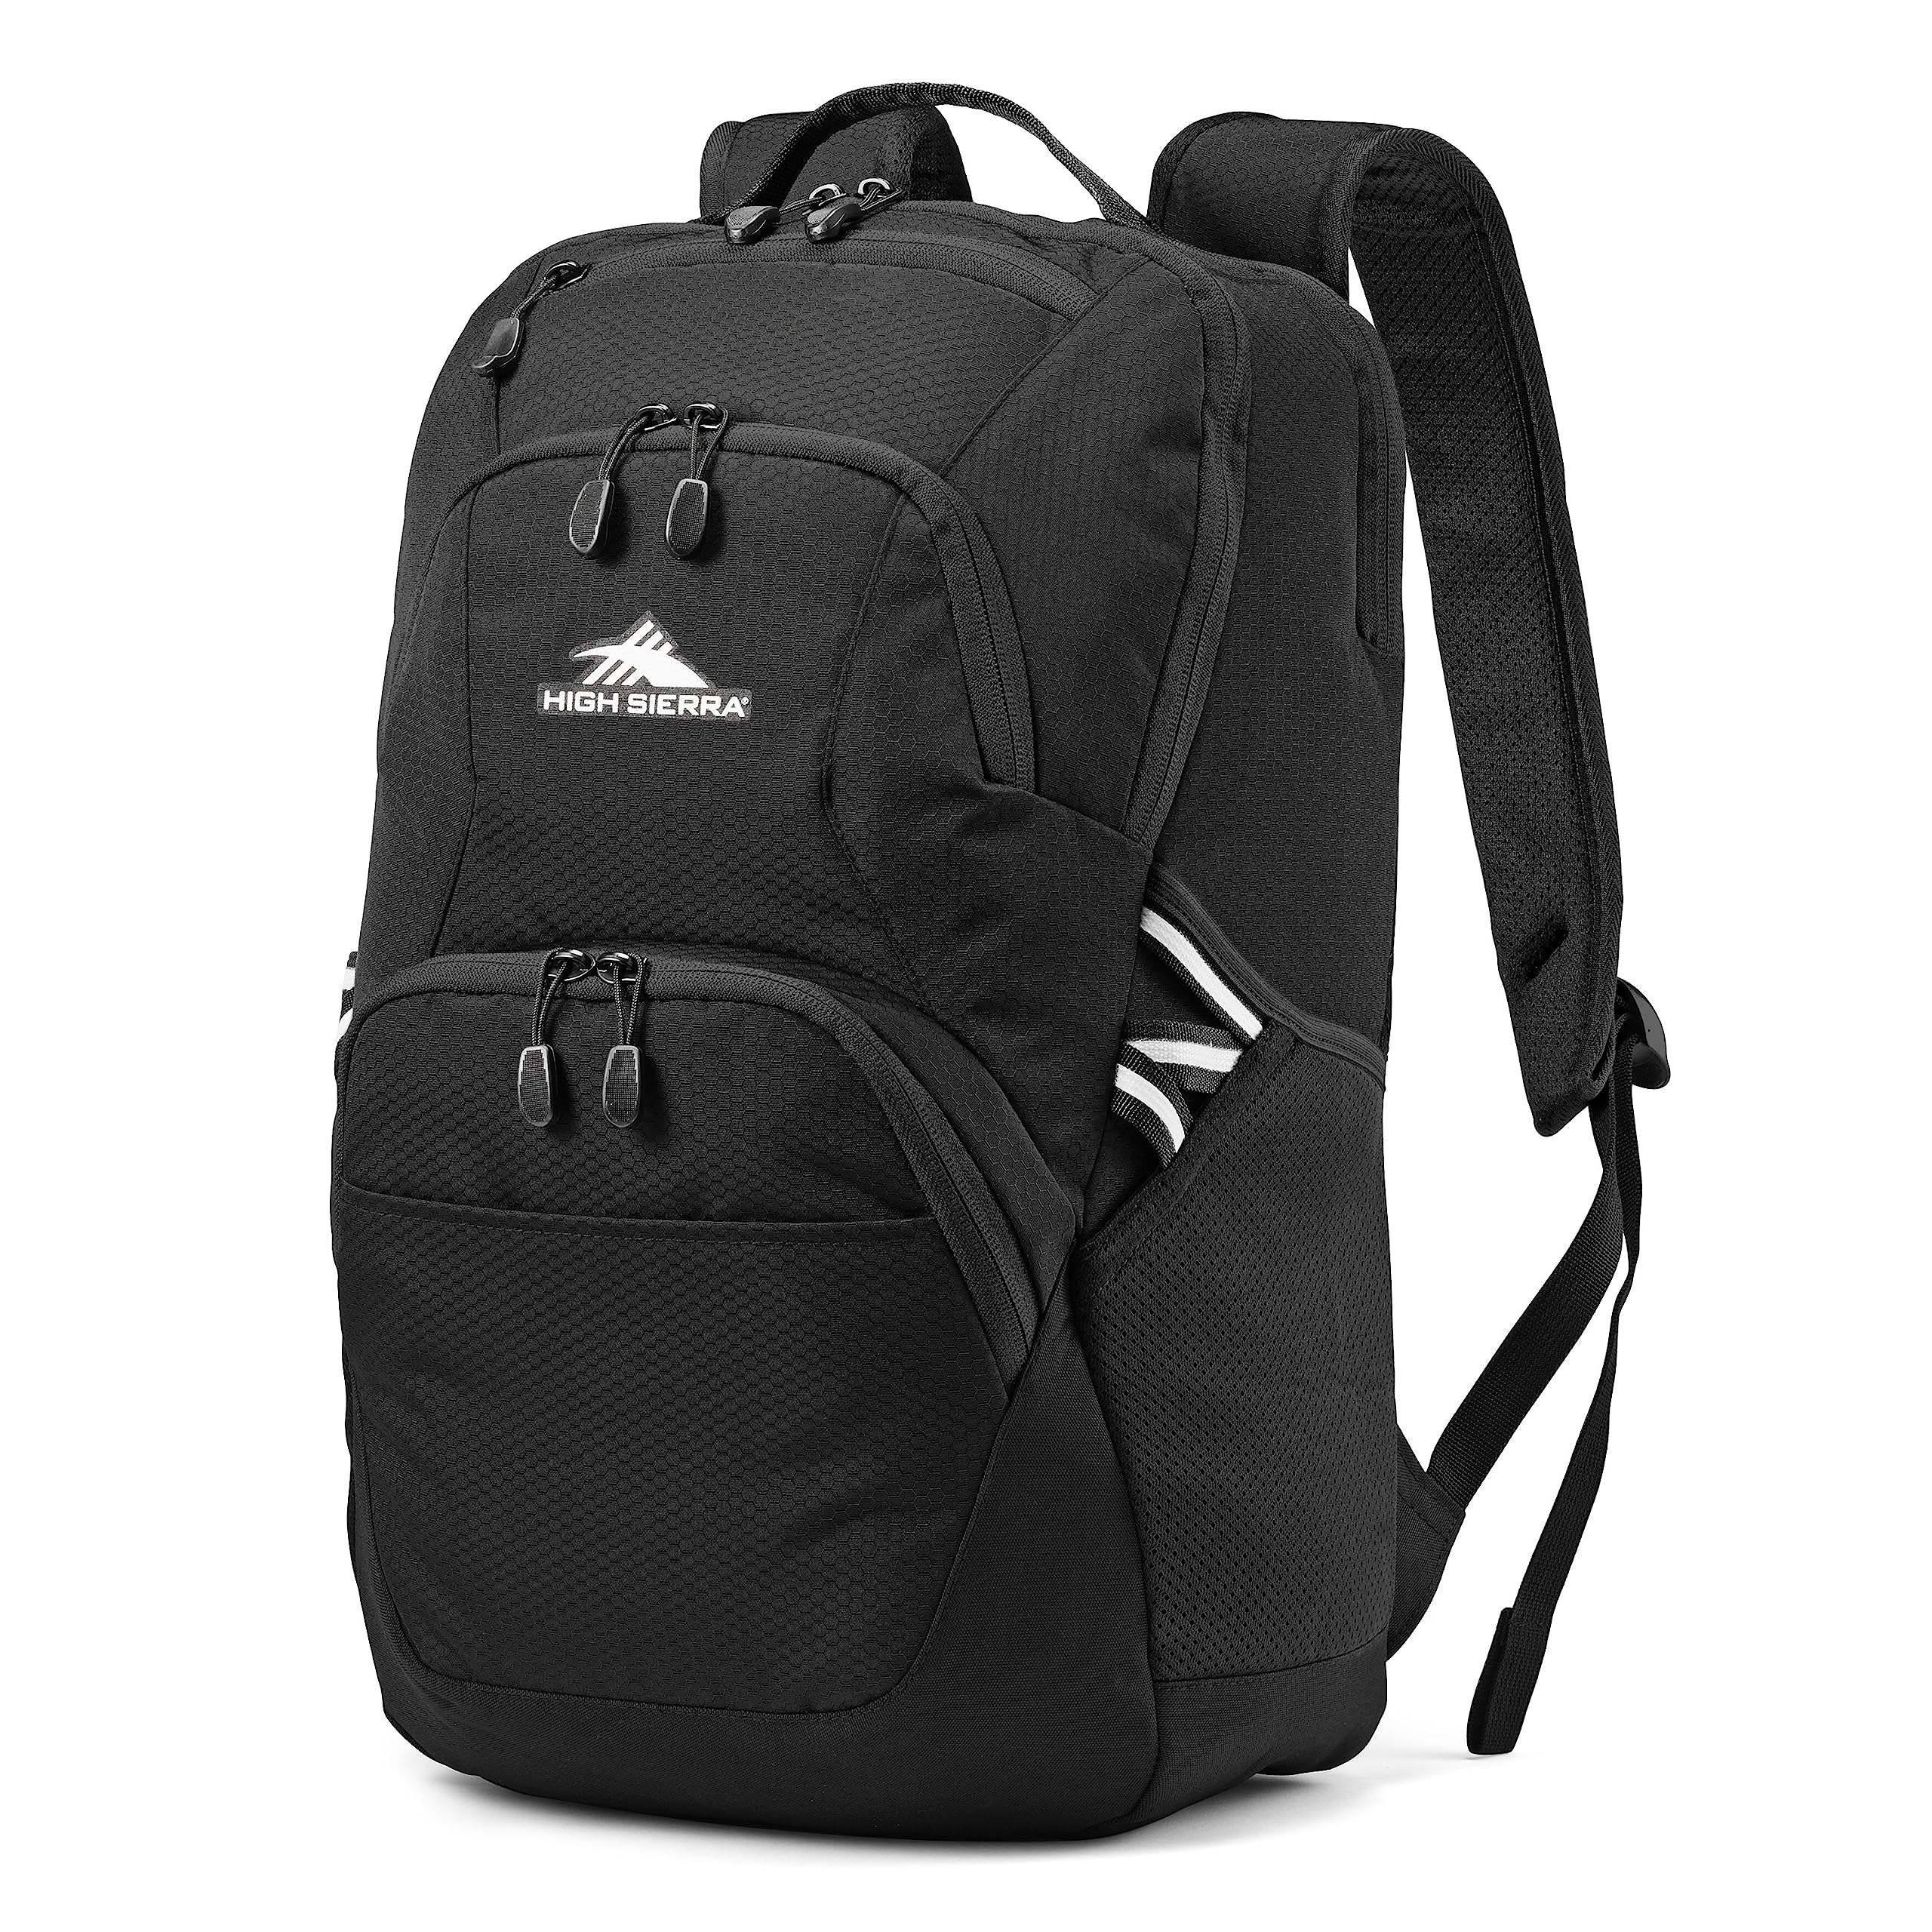 High Sierra Swoop SG Backpack, Travel or Work Laptop Bookbag with Drop Protection Pocket, and Tablet Sleeve, One Size, Black